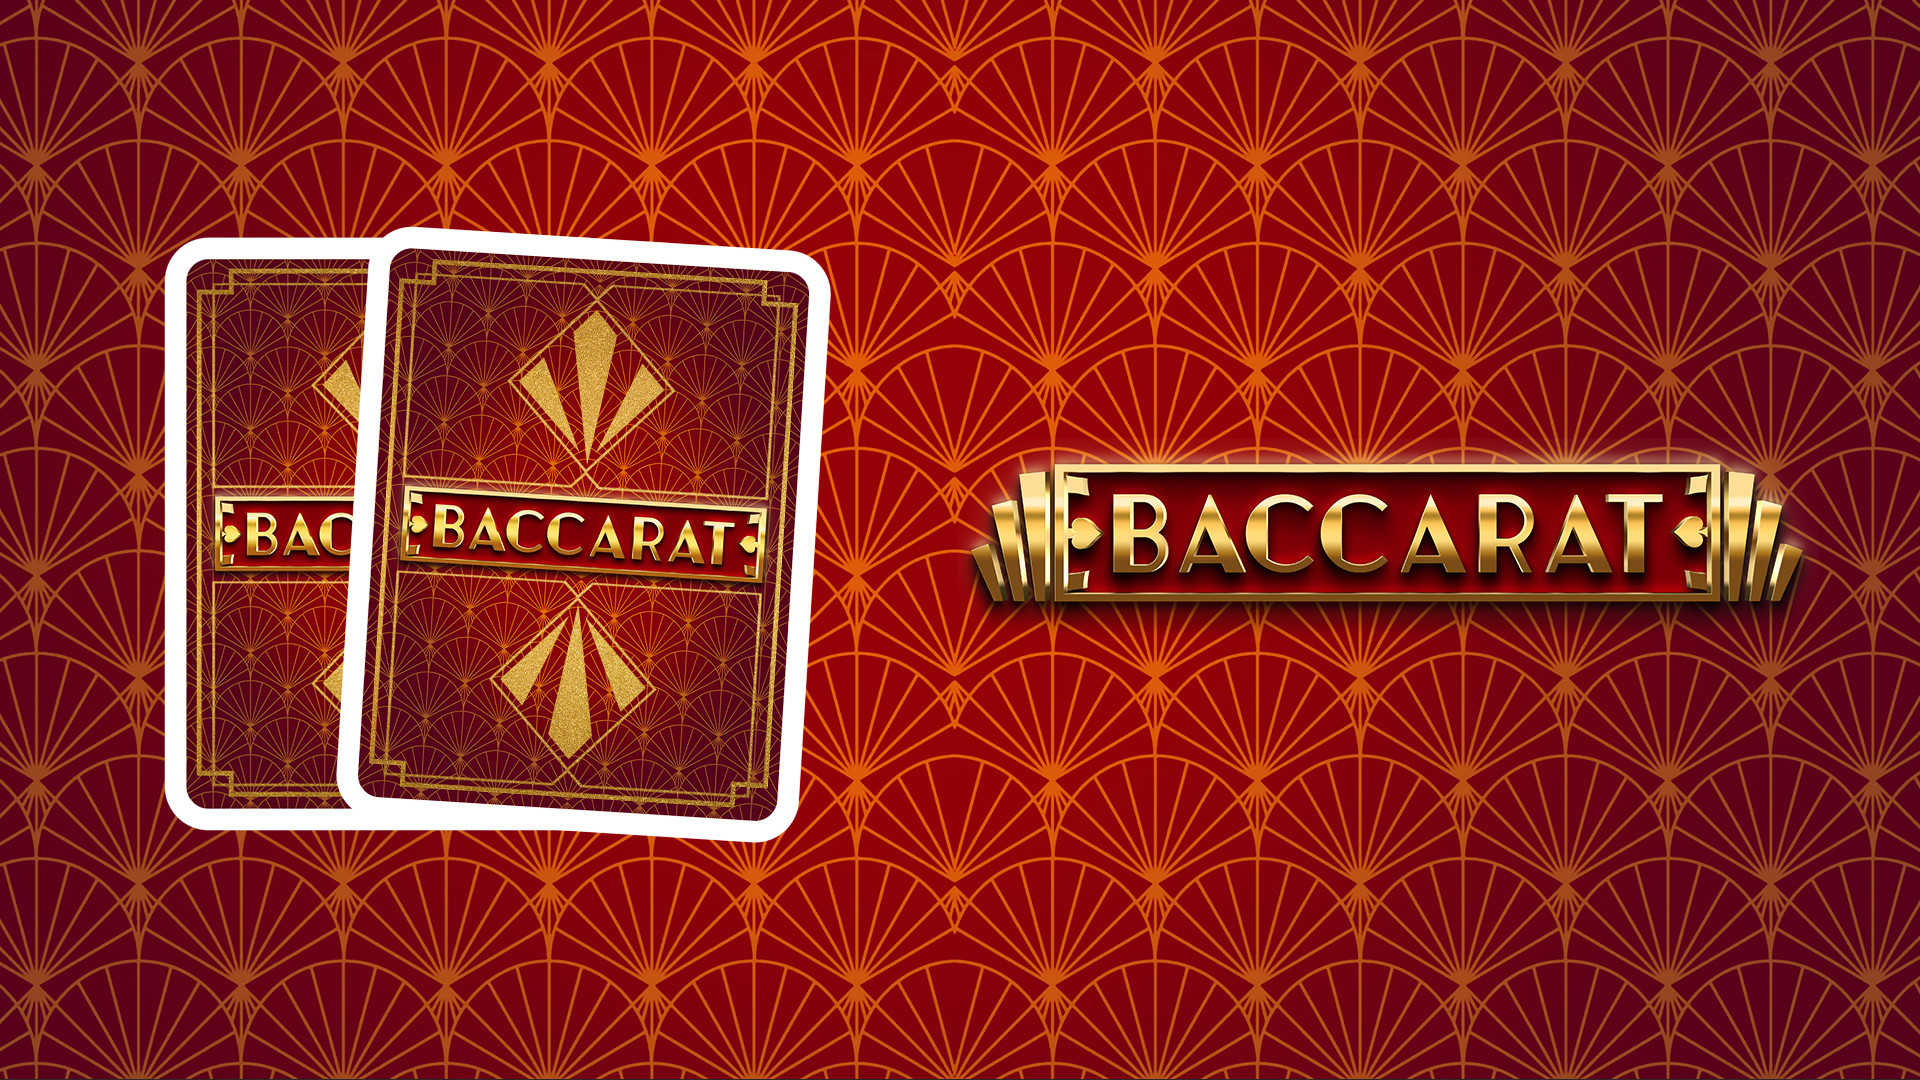 Baccarat - Gaming Corps